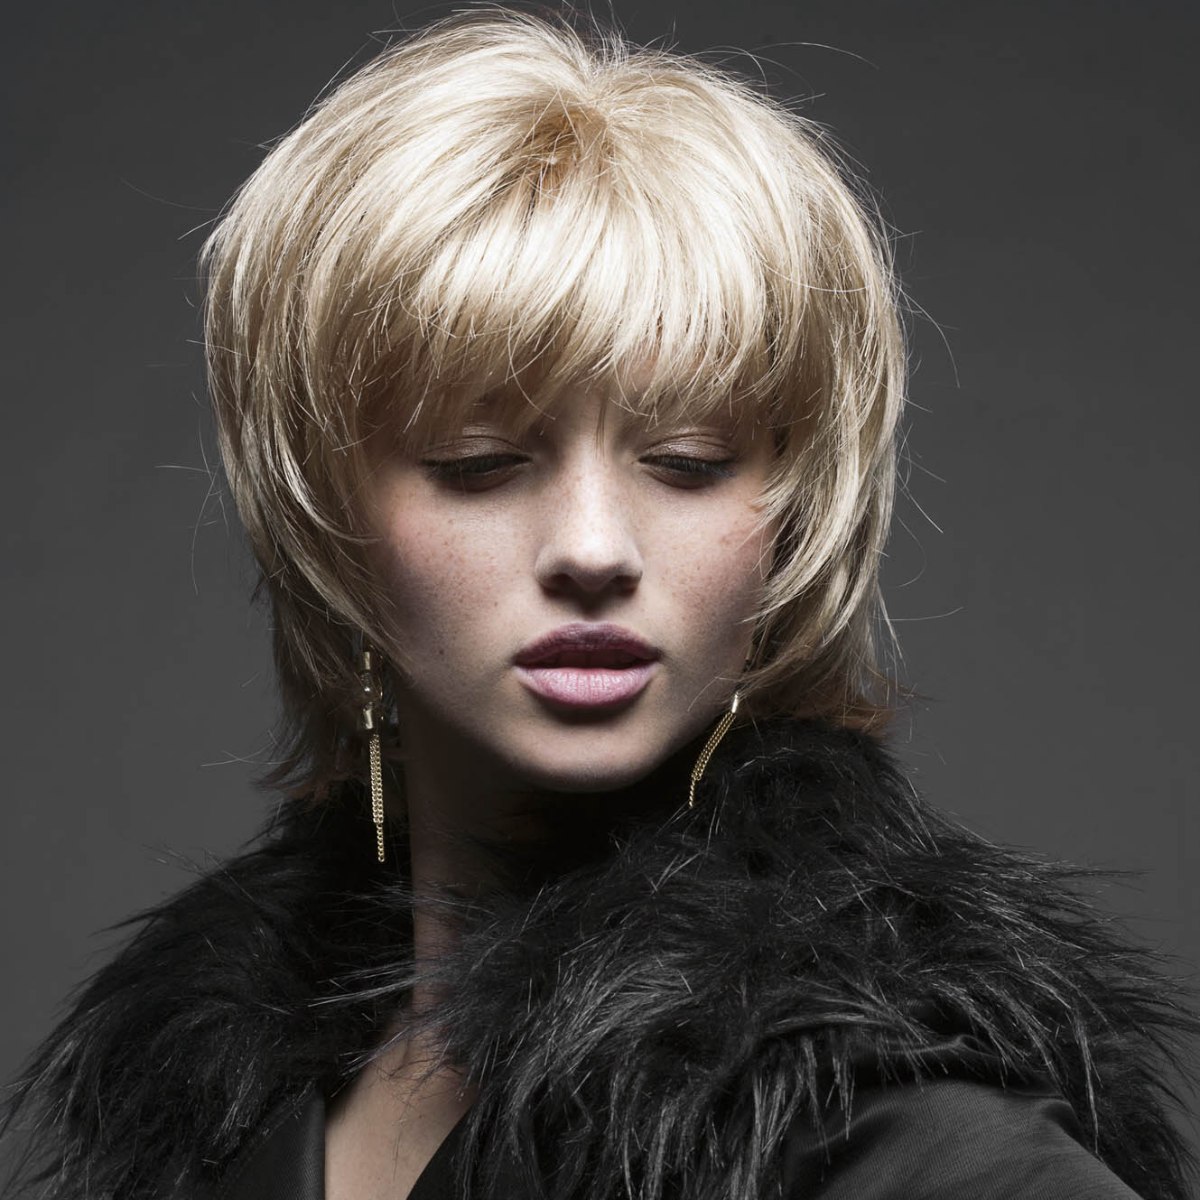 Neck Length Wavy Bob Pictures, Photos, and Images for Facebook, Tumblr,  Pinterest, and Twitter